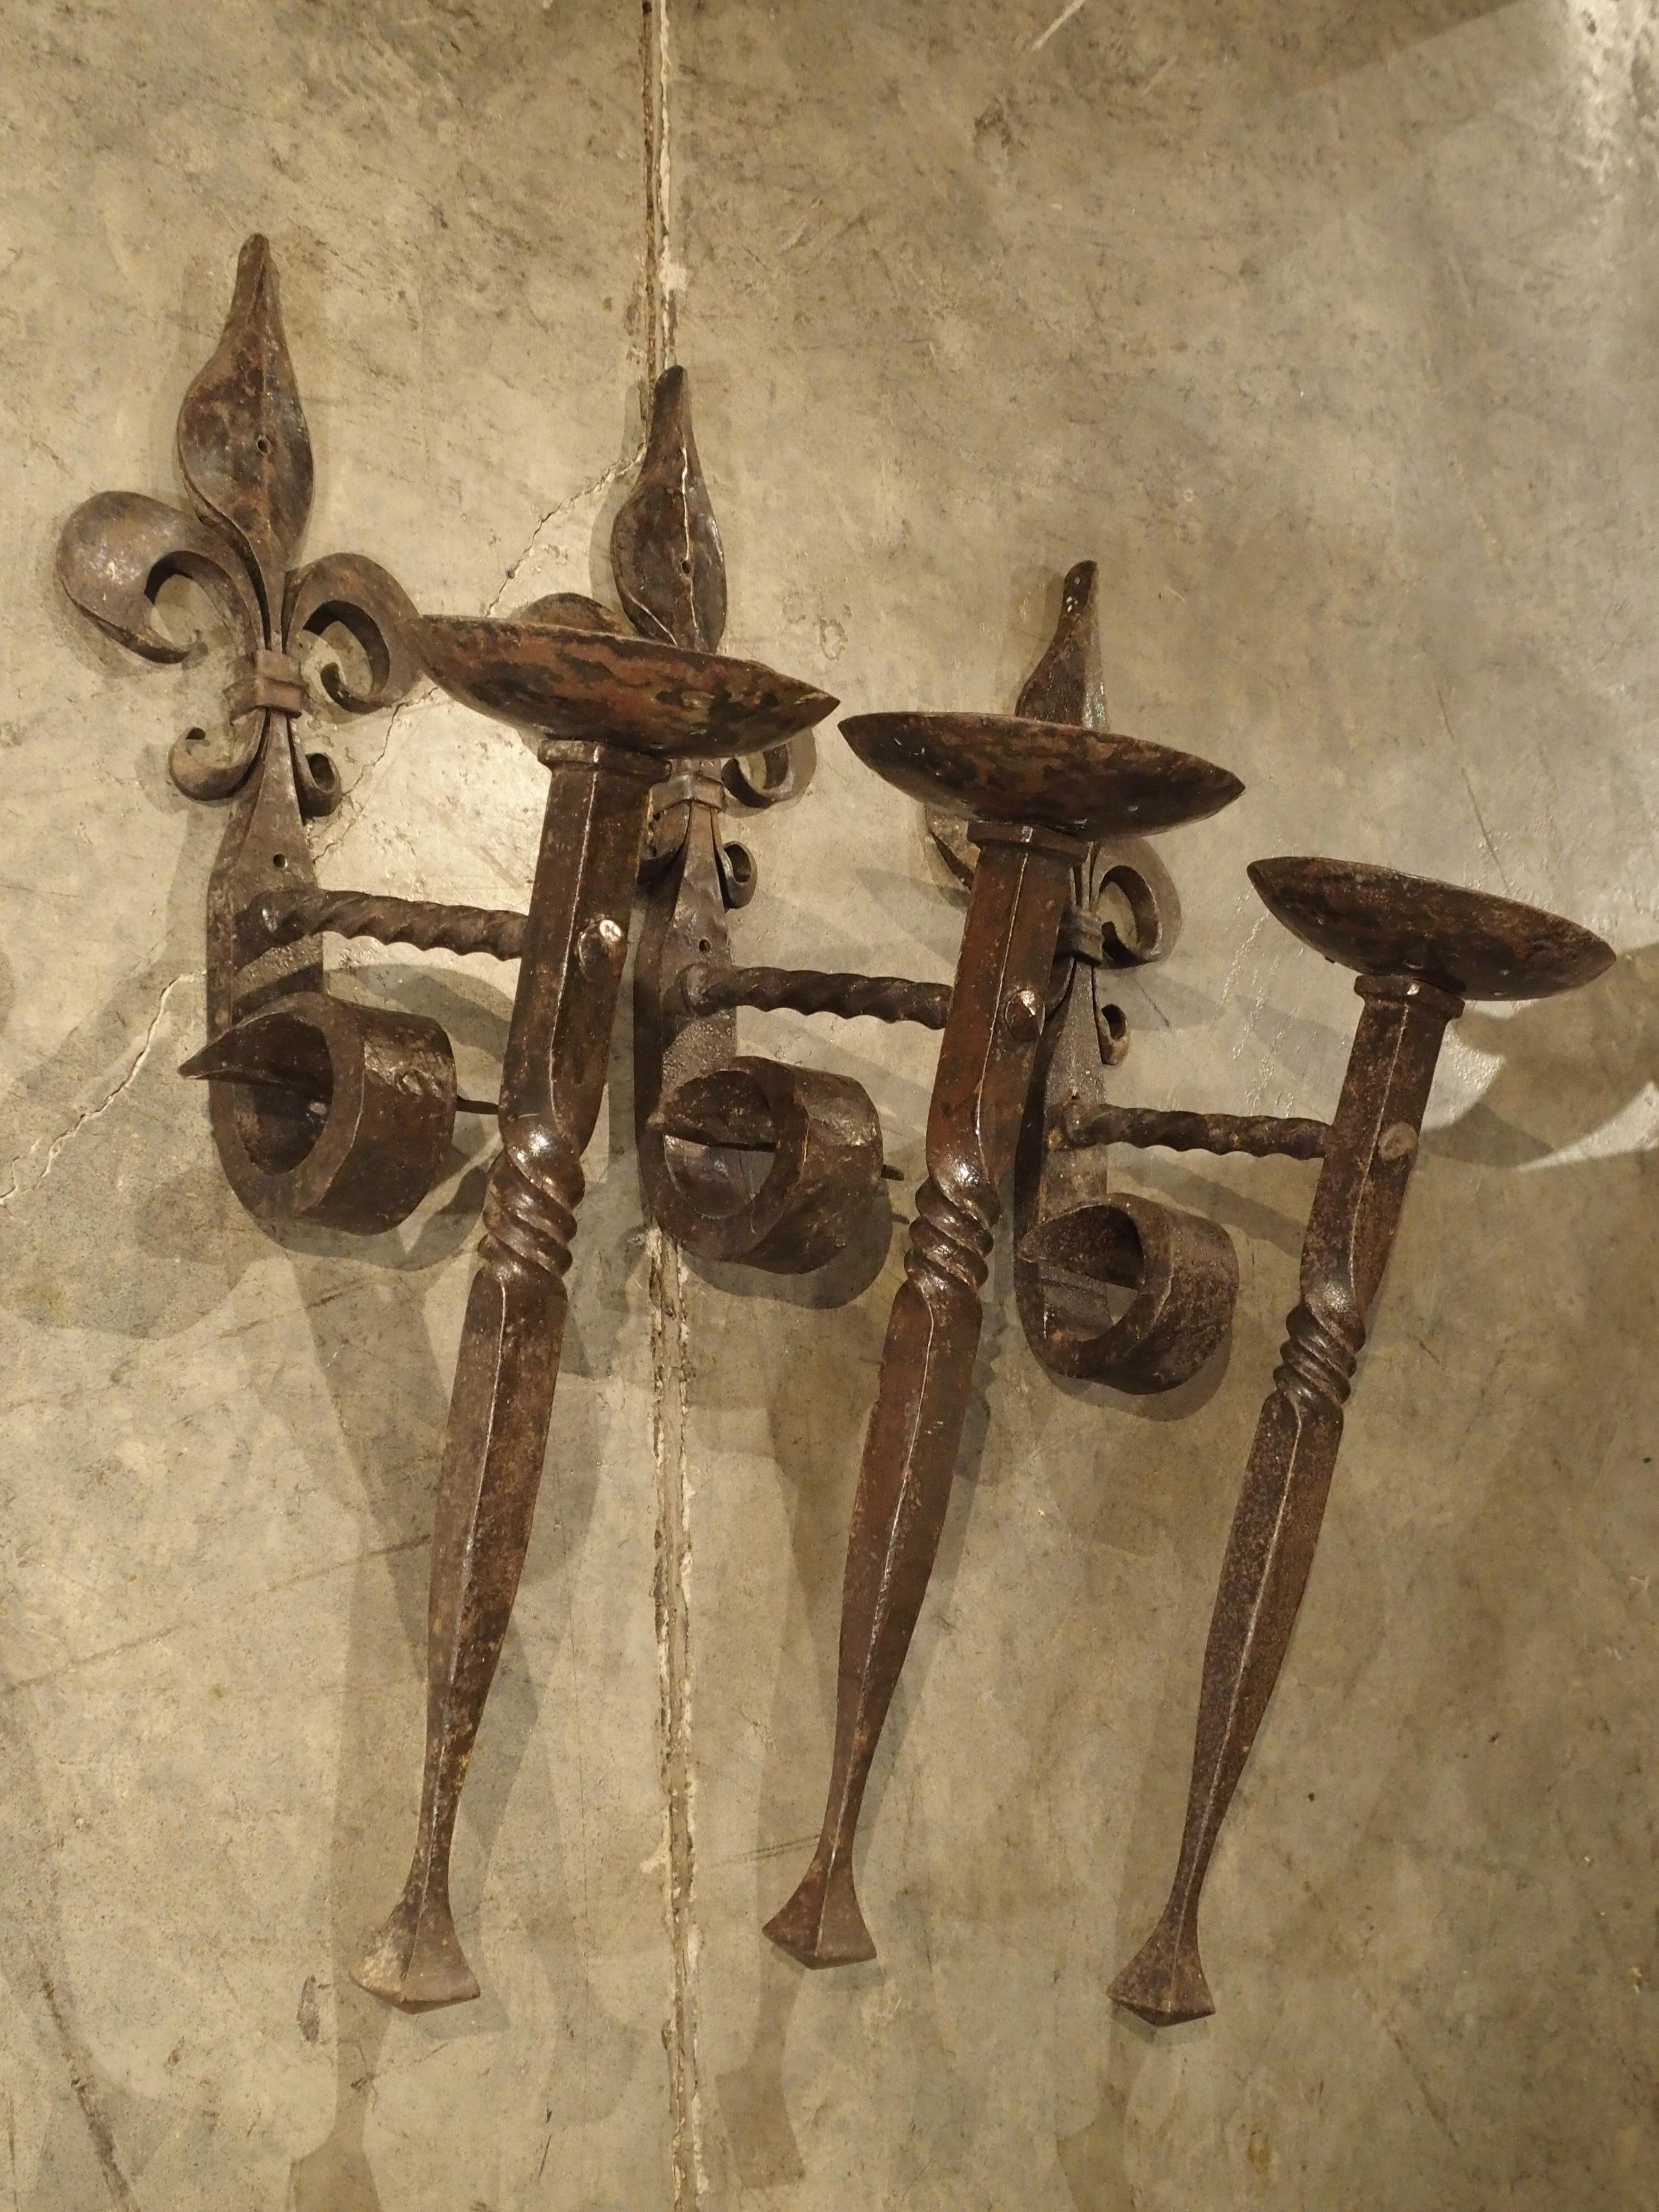 Wrought Iron Set of 3 Antique Forged Iron Sconces from France, circa 1900